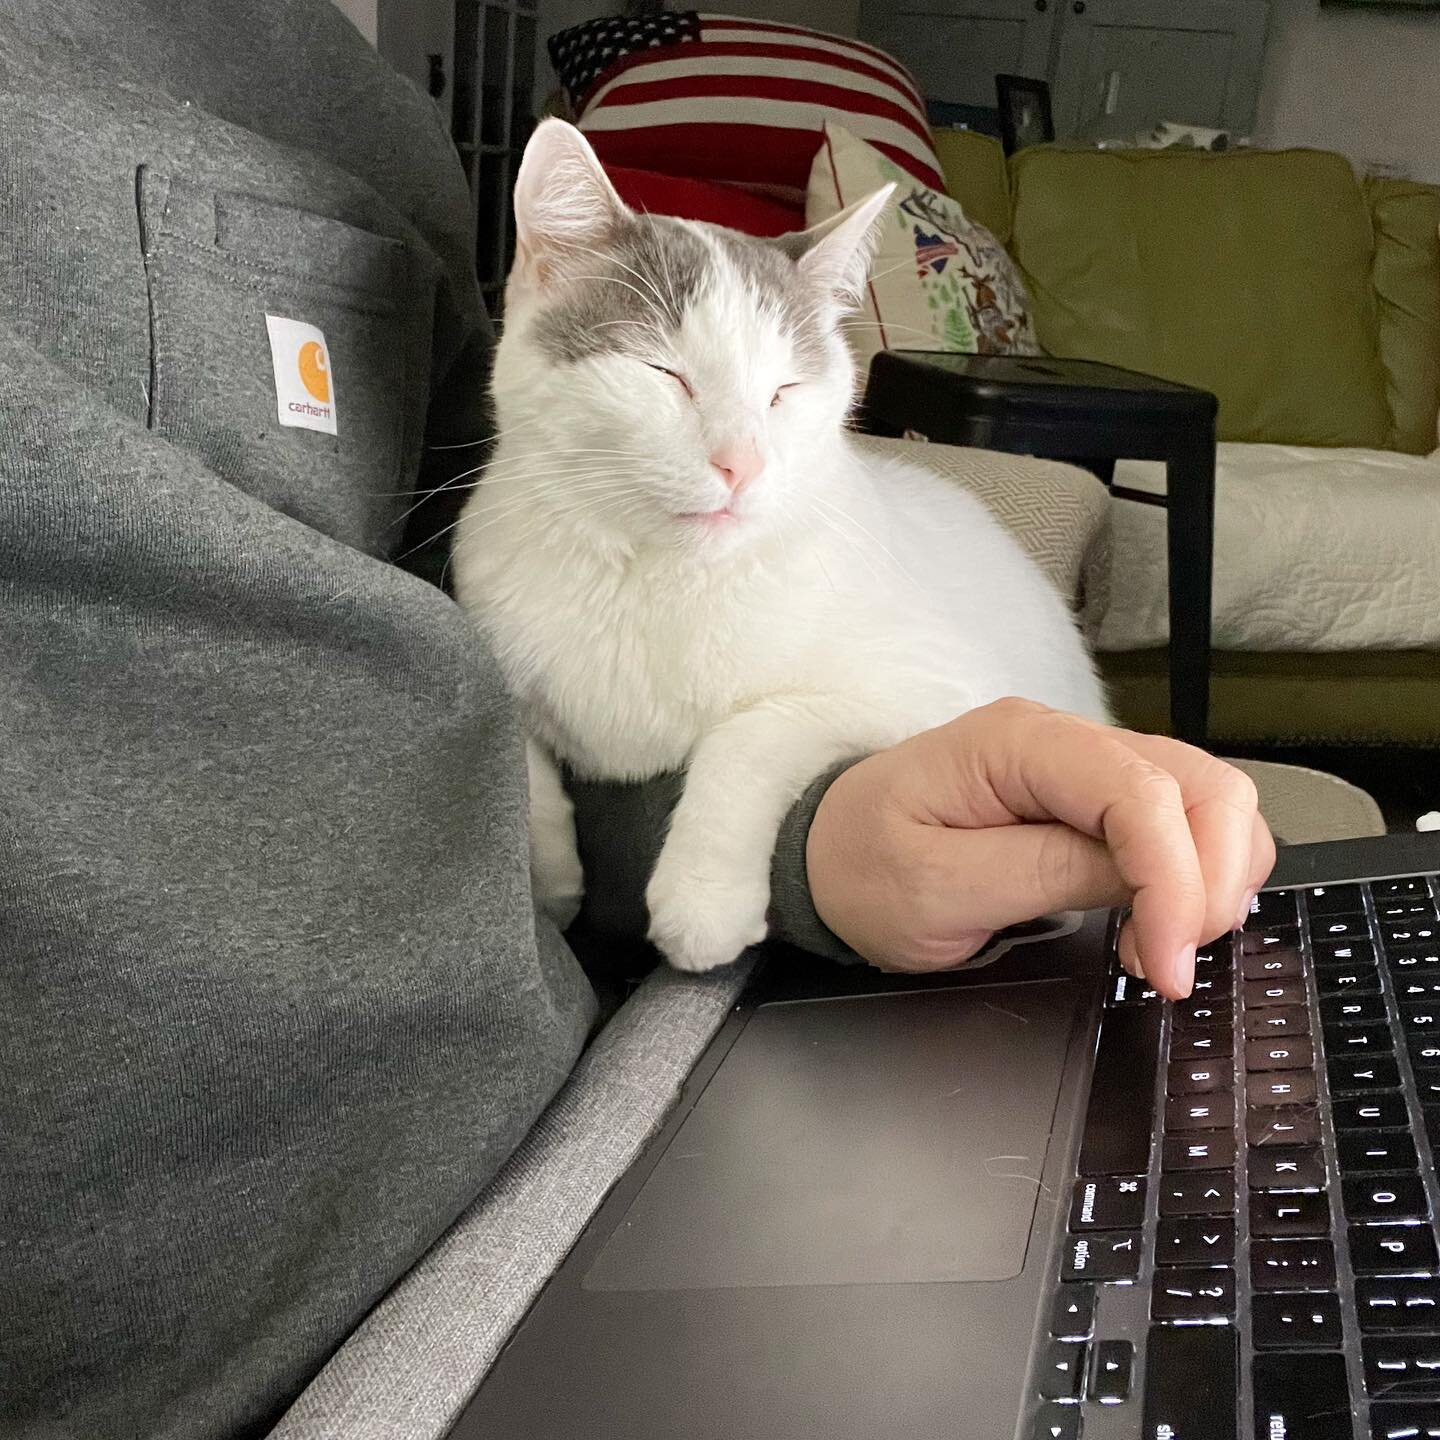 Four legged tech support can&rsquo;t be beat.🐱

#cute #love #catlover #animal #pet #instagood #catoftheday #meow #animals #petstagram #photooftheday #funny #ilovemycat #adorable #lovecats #petsagram #instagramcats #catlovers #pepper